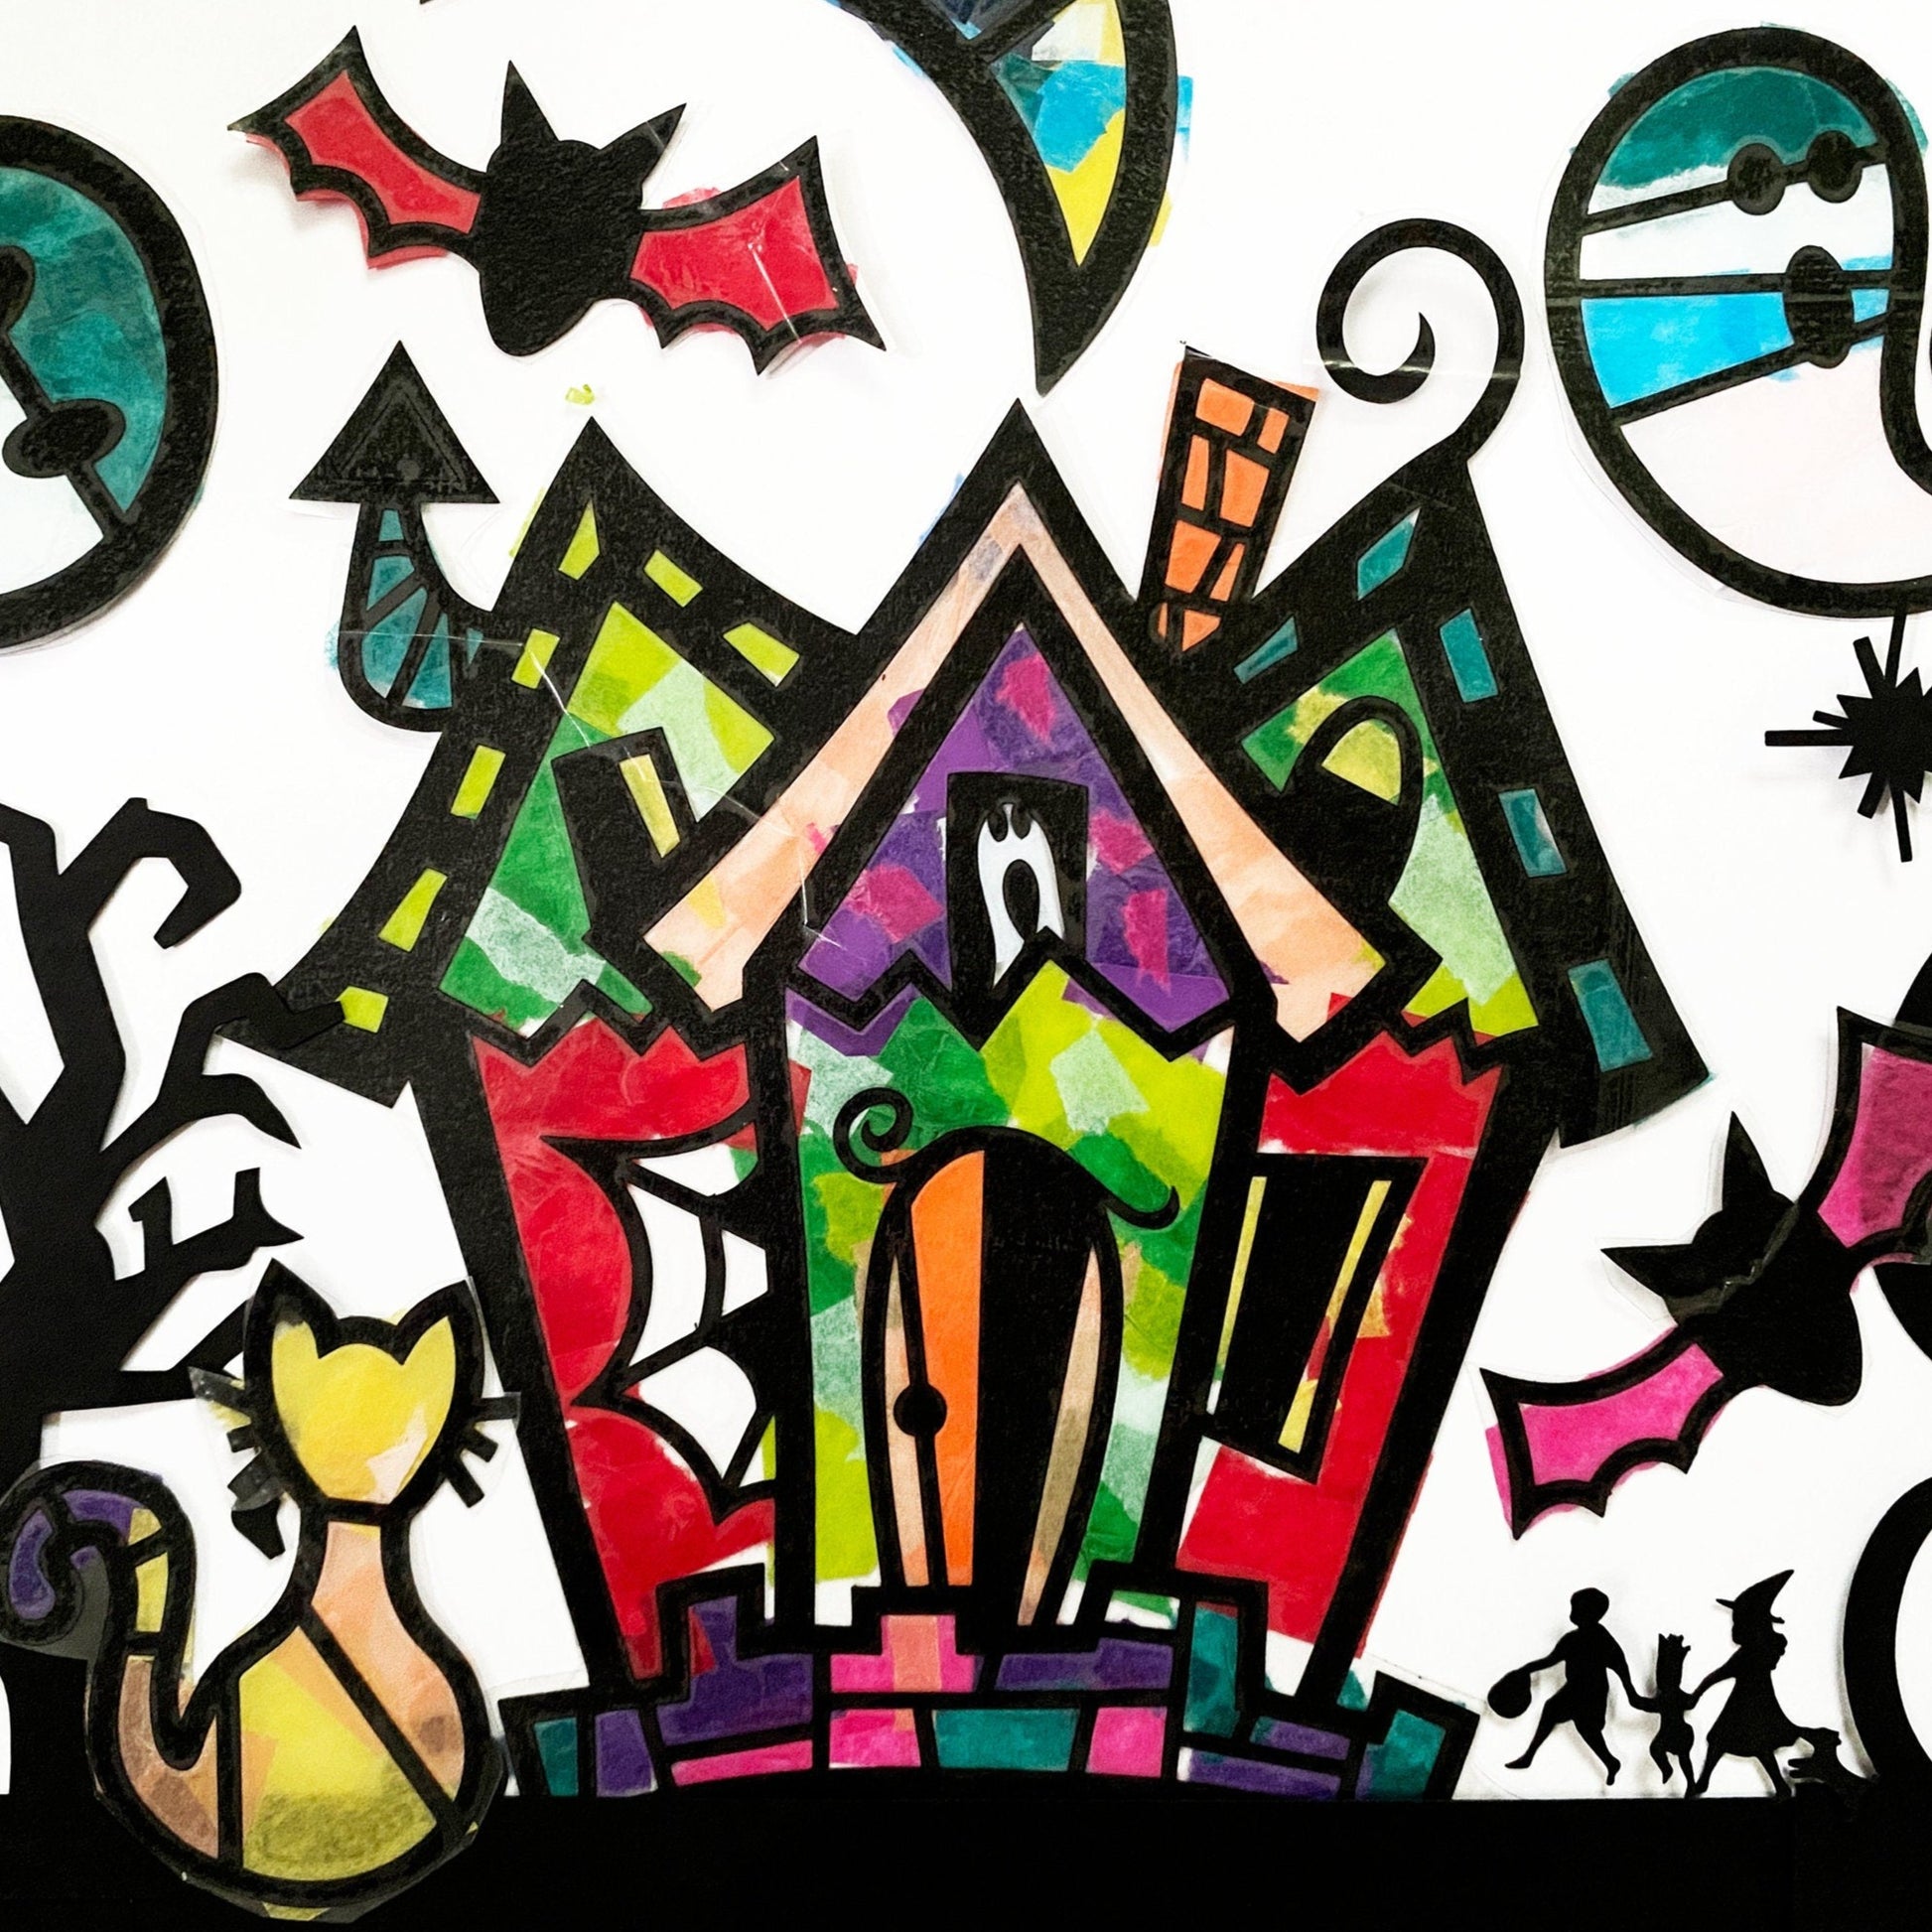 Haunted House craft kit for kids. Halloween activity for party.